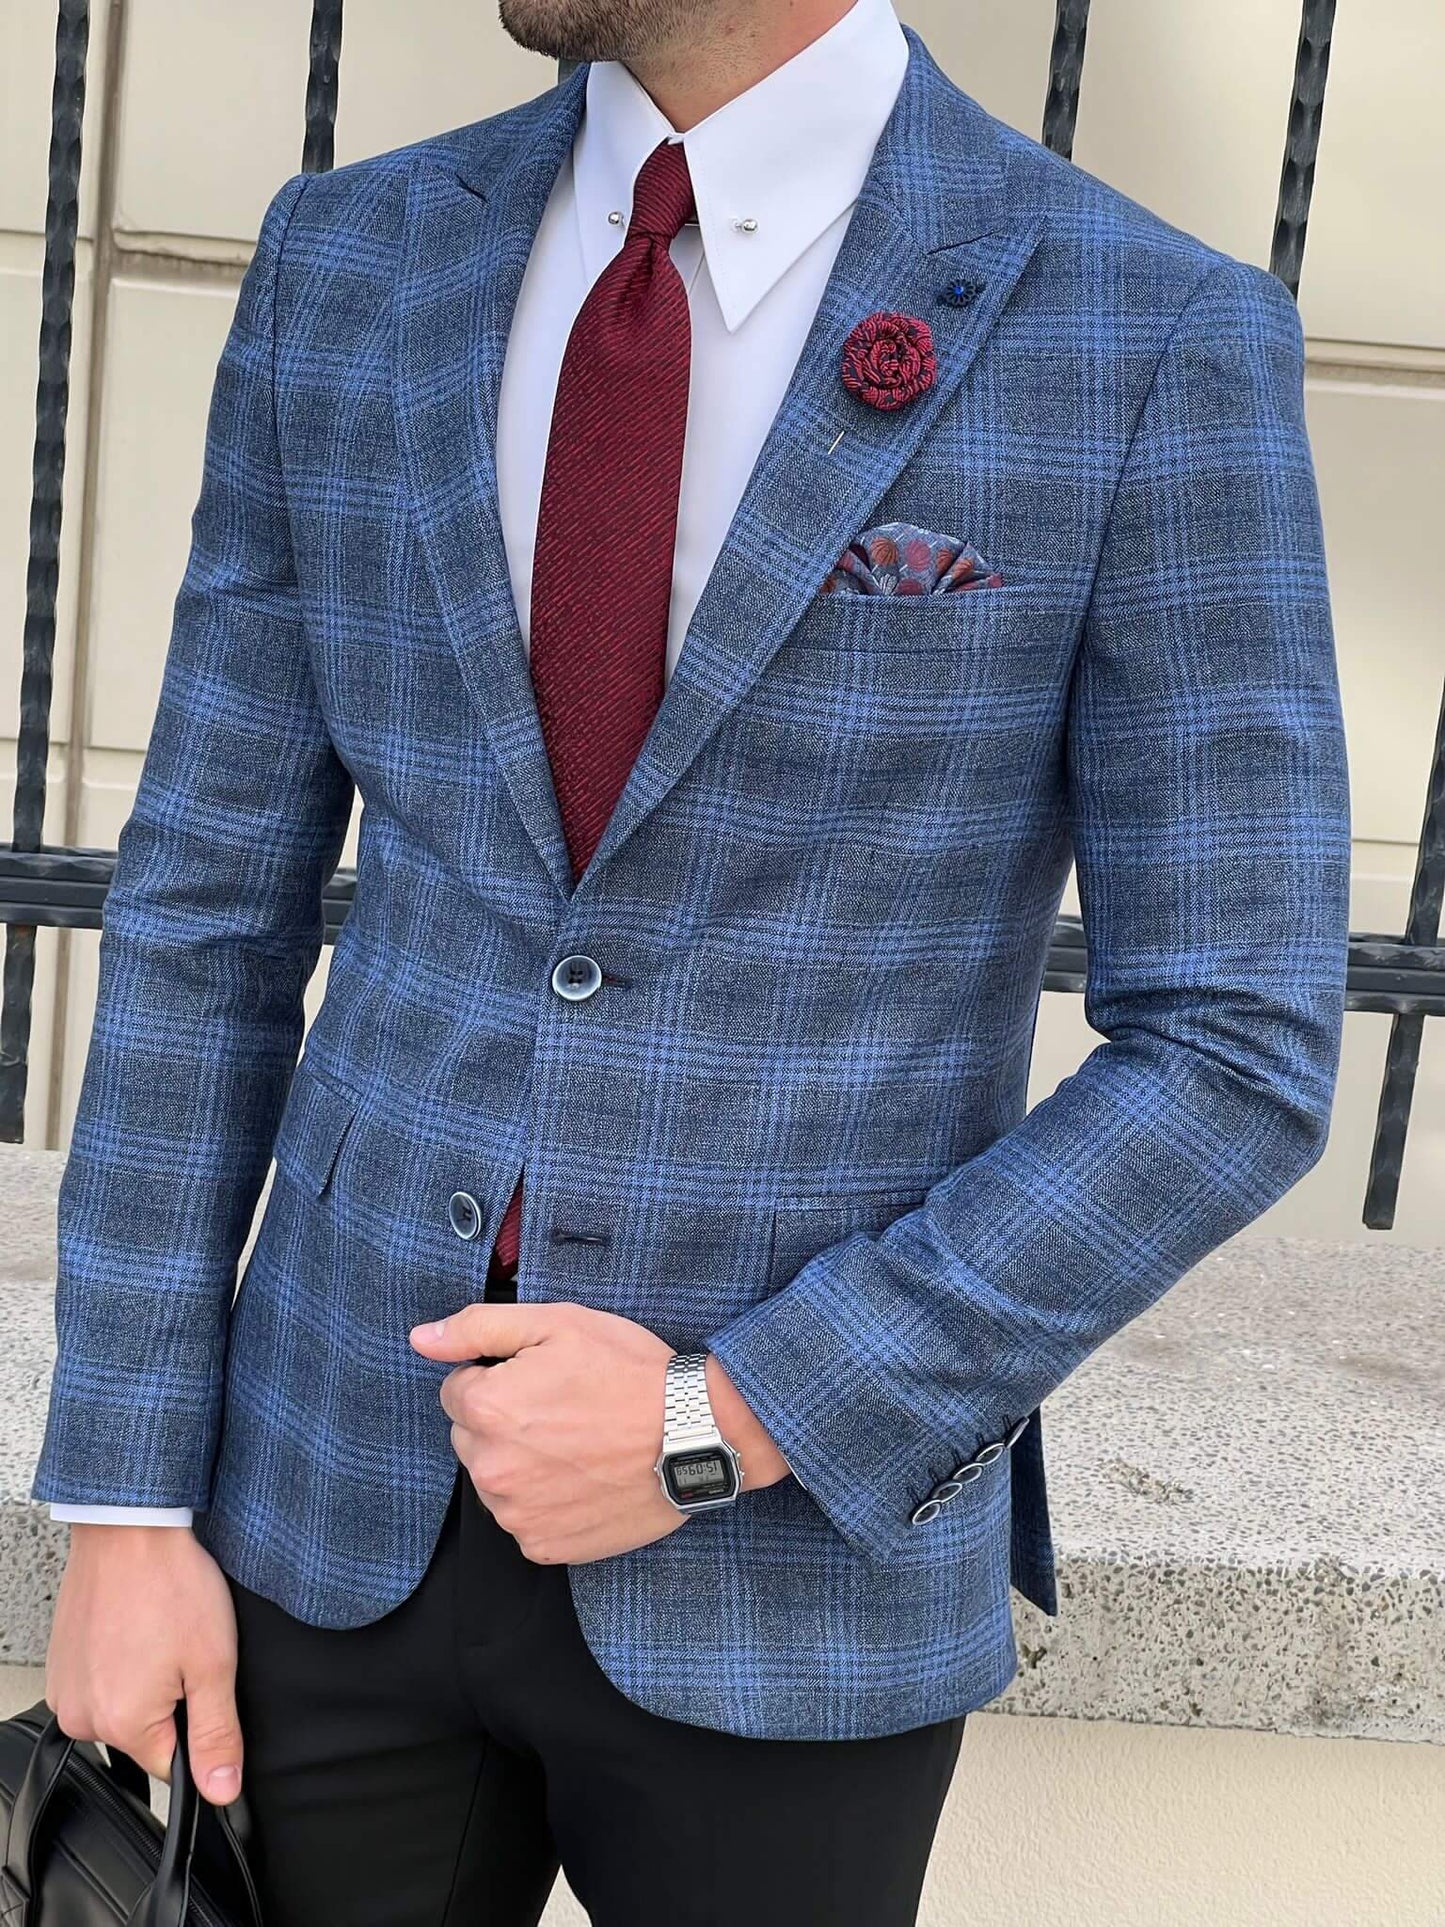 A navy blue jacket with unique patterns